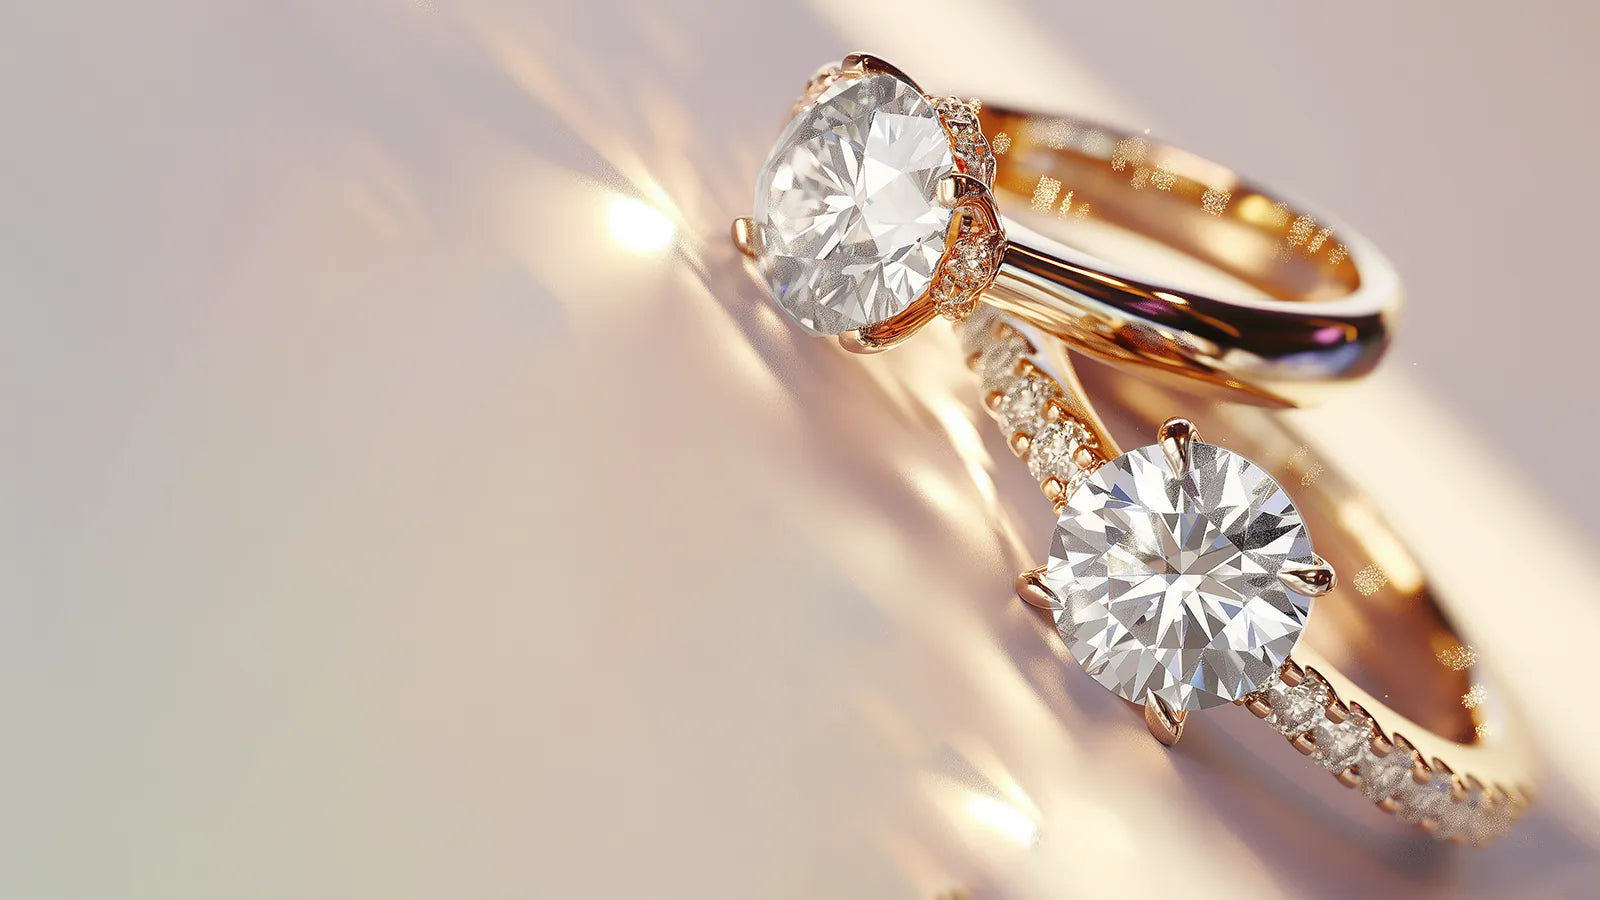 Two exquisite custom engagement rings showcasing a solitaire and a pavé band, highlighting fine craftsmanship with radiant diamonds on a subtle rose-hued background.